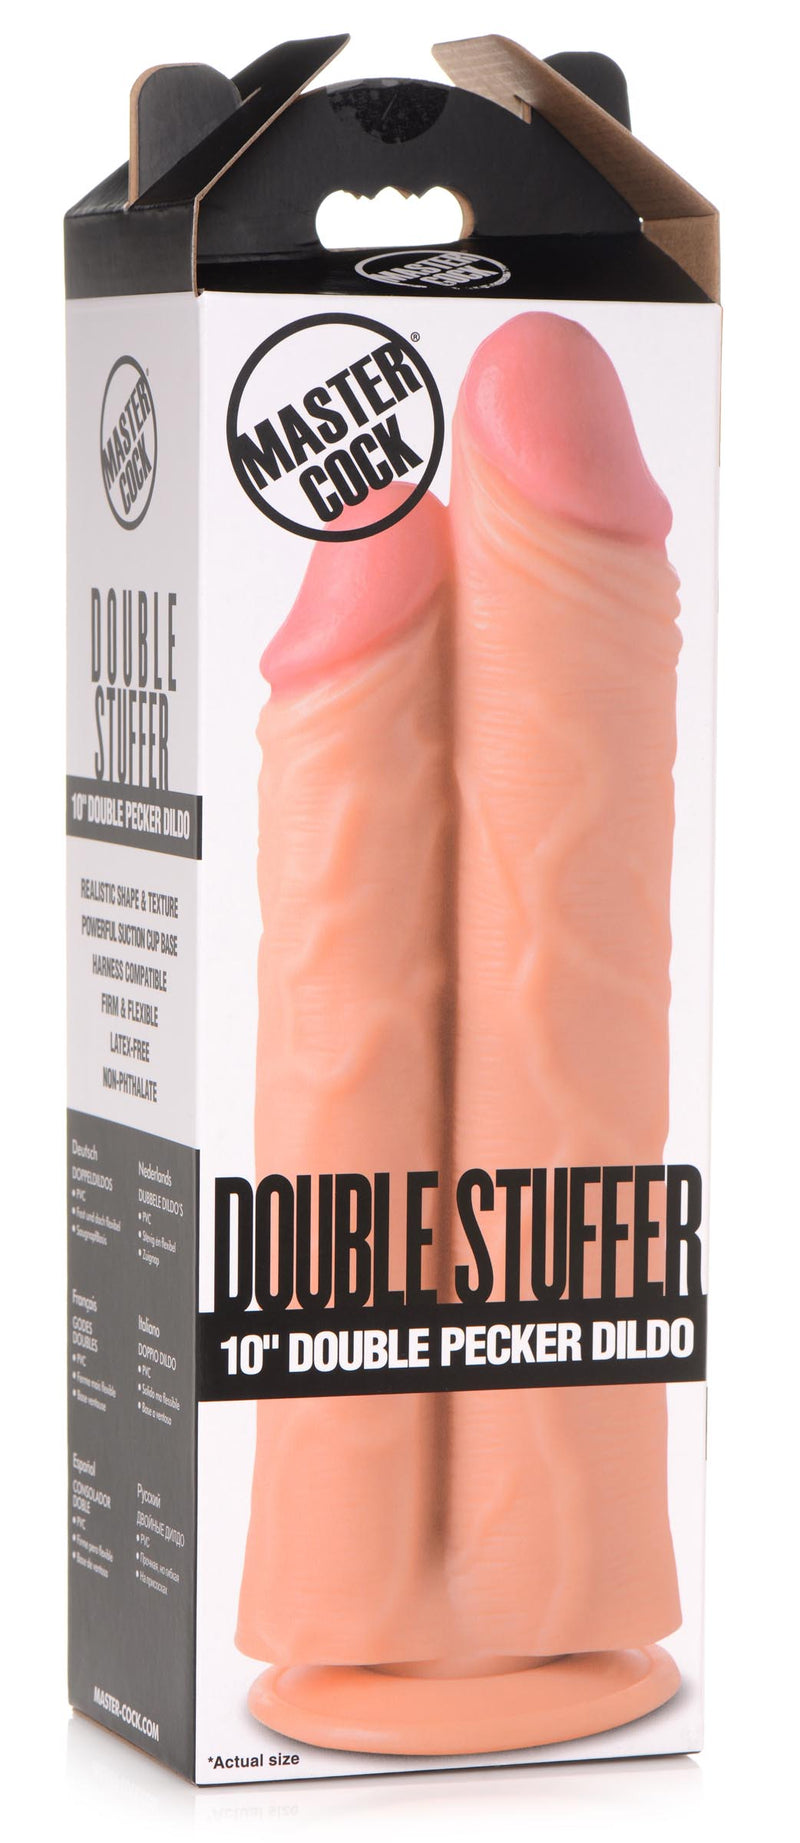 Double-Ended Dildo Light Double Stuffer - 10 Inch Dildos from Master Cock